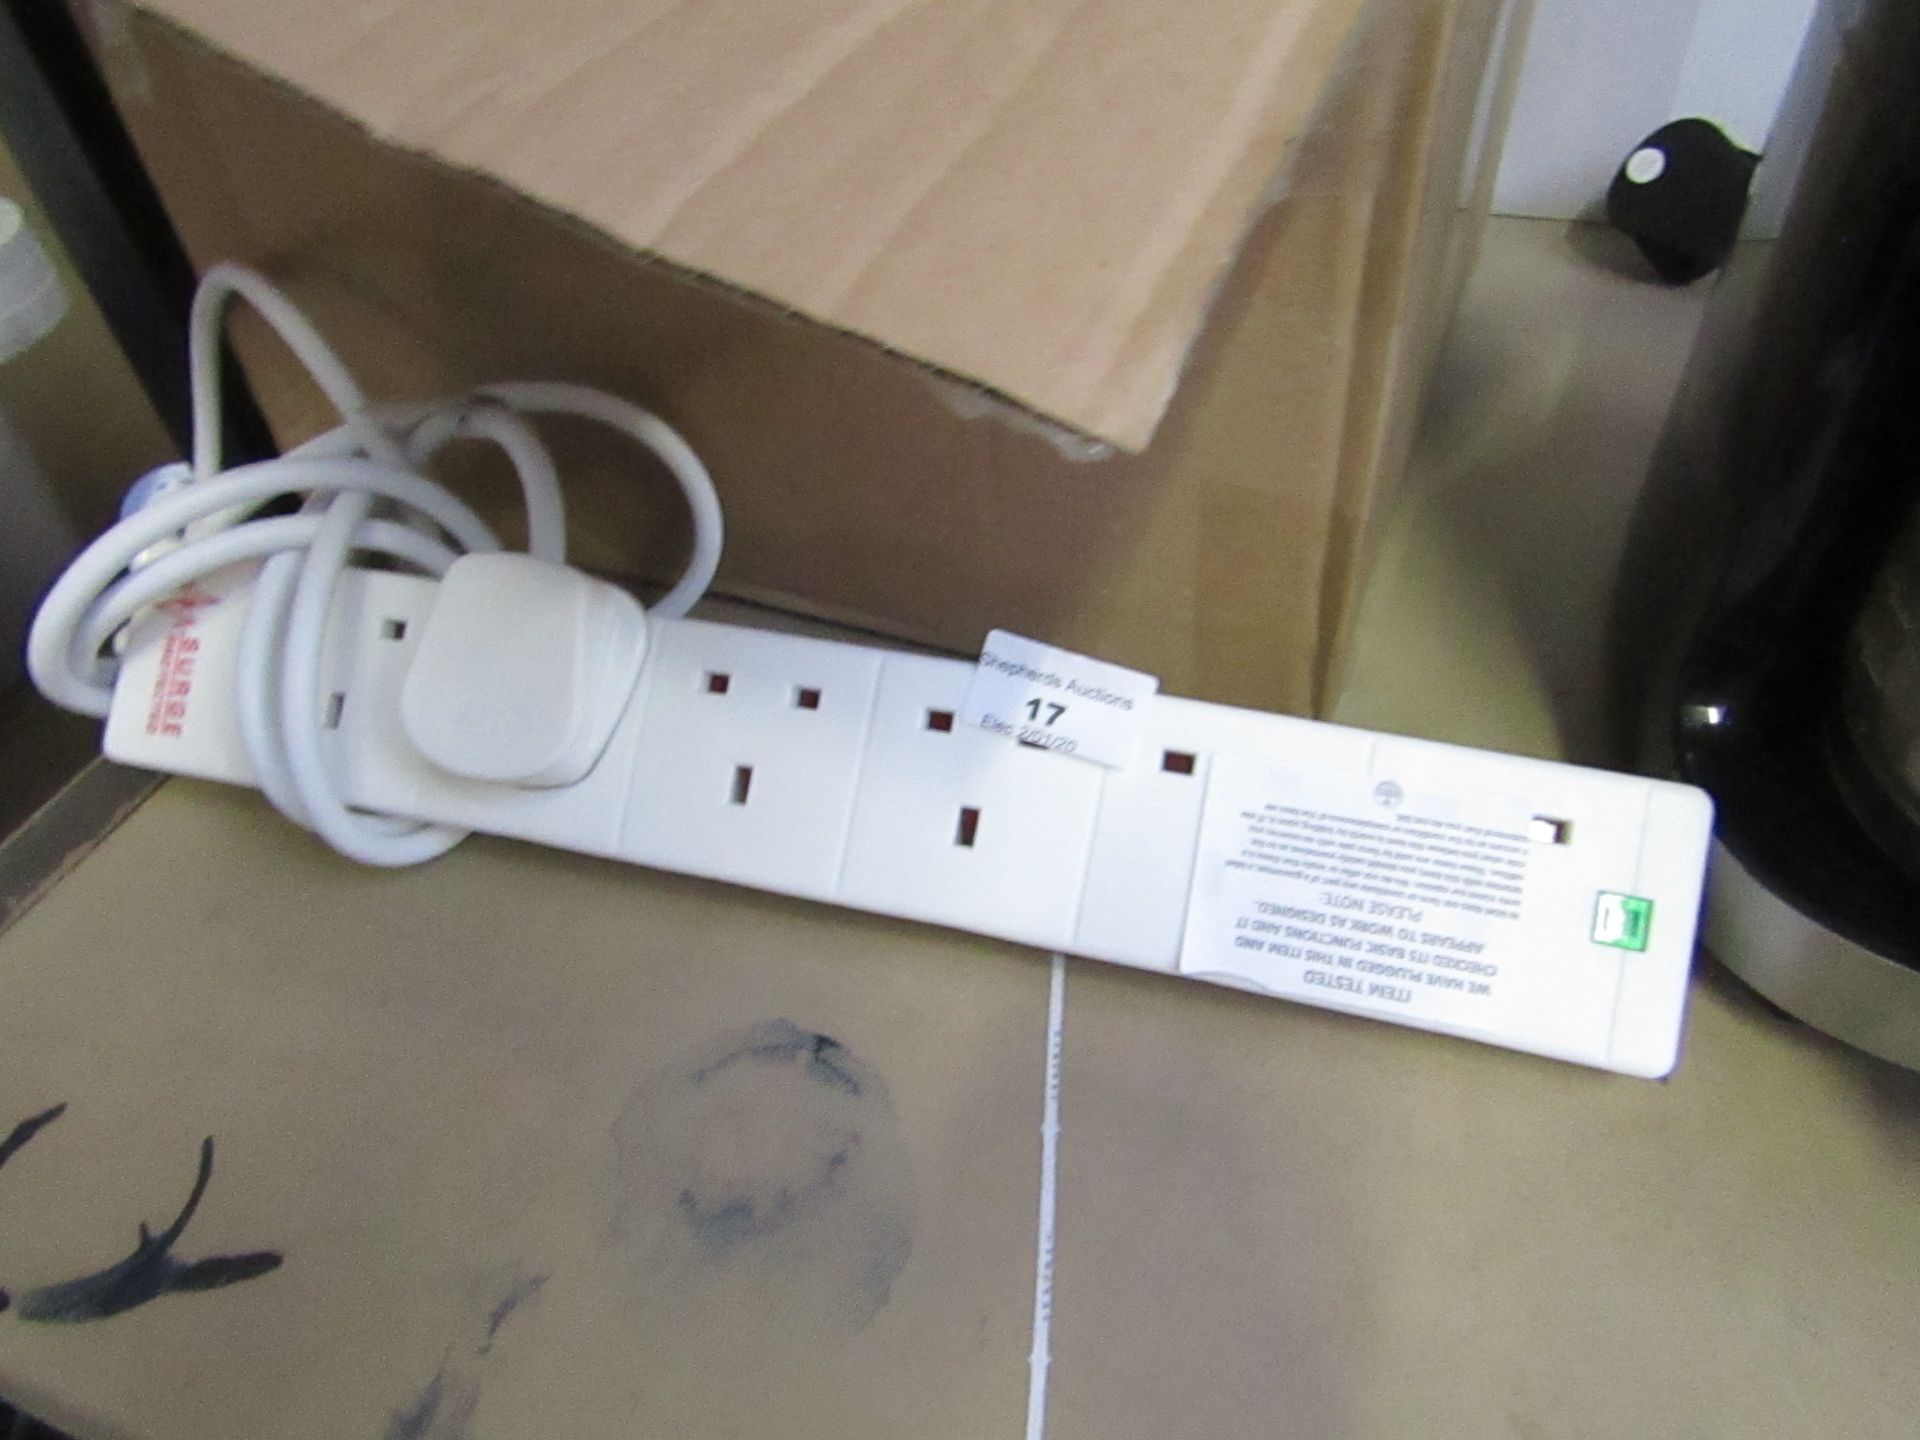 Extension lead - With 6 Plugs compatibility - (White) - Tested working.